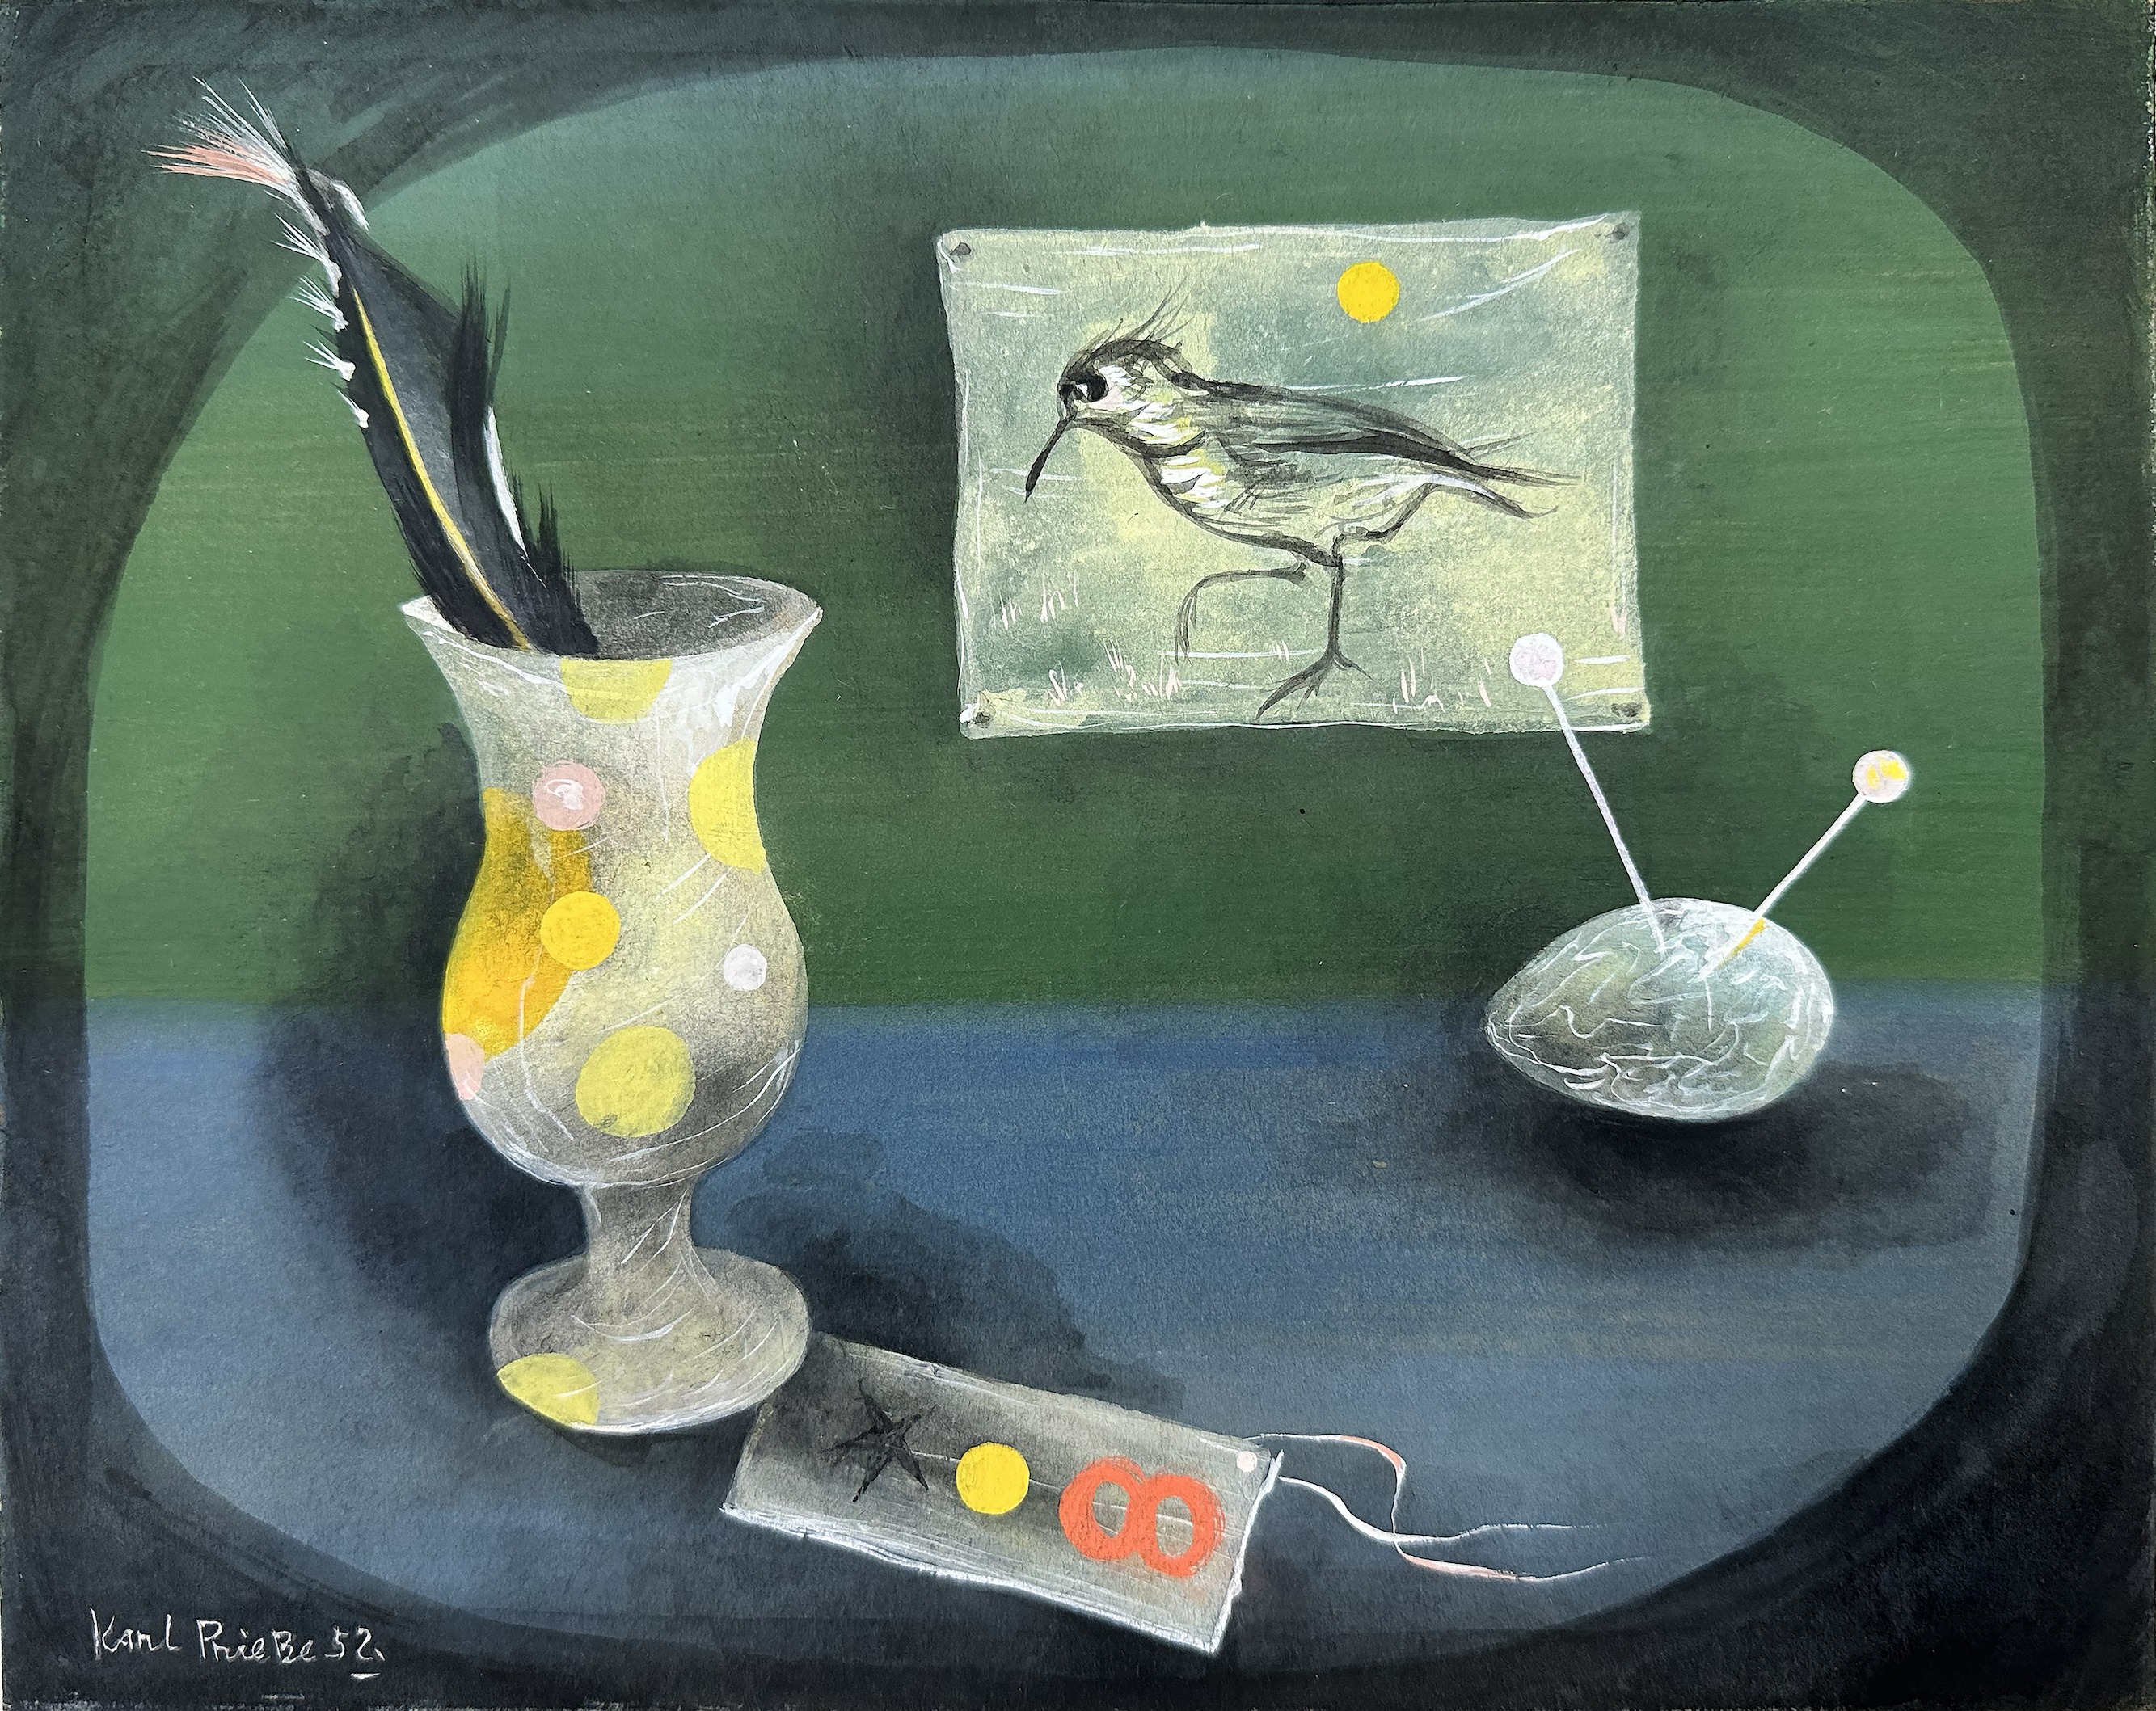 A cup with a bird feather, egg with two knitting needles, small label with the number 8 and a star appear on a desk. A pinned picture of a black and white bird appears behind.